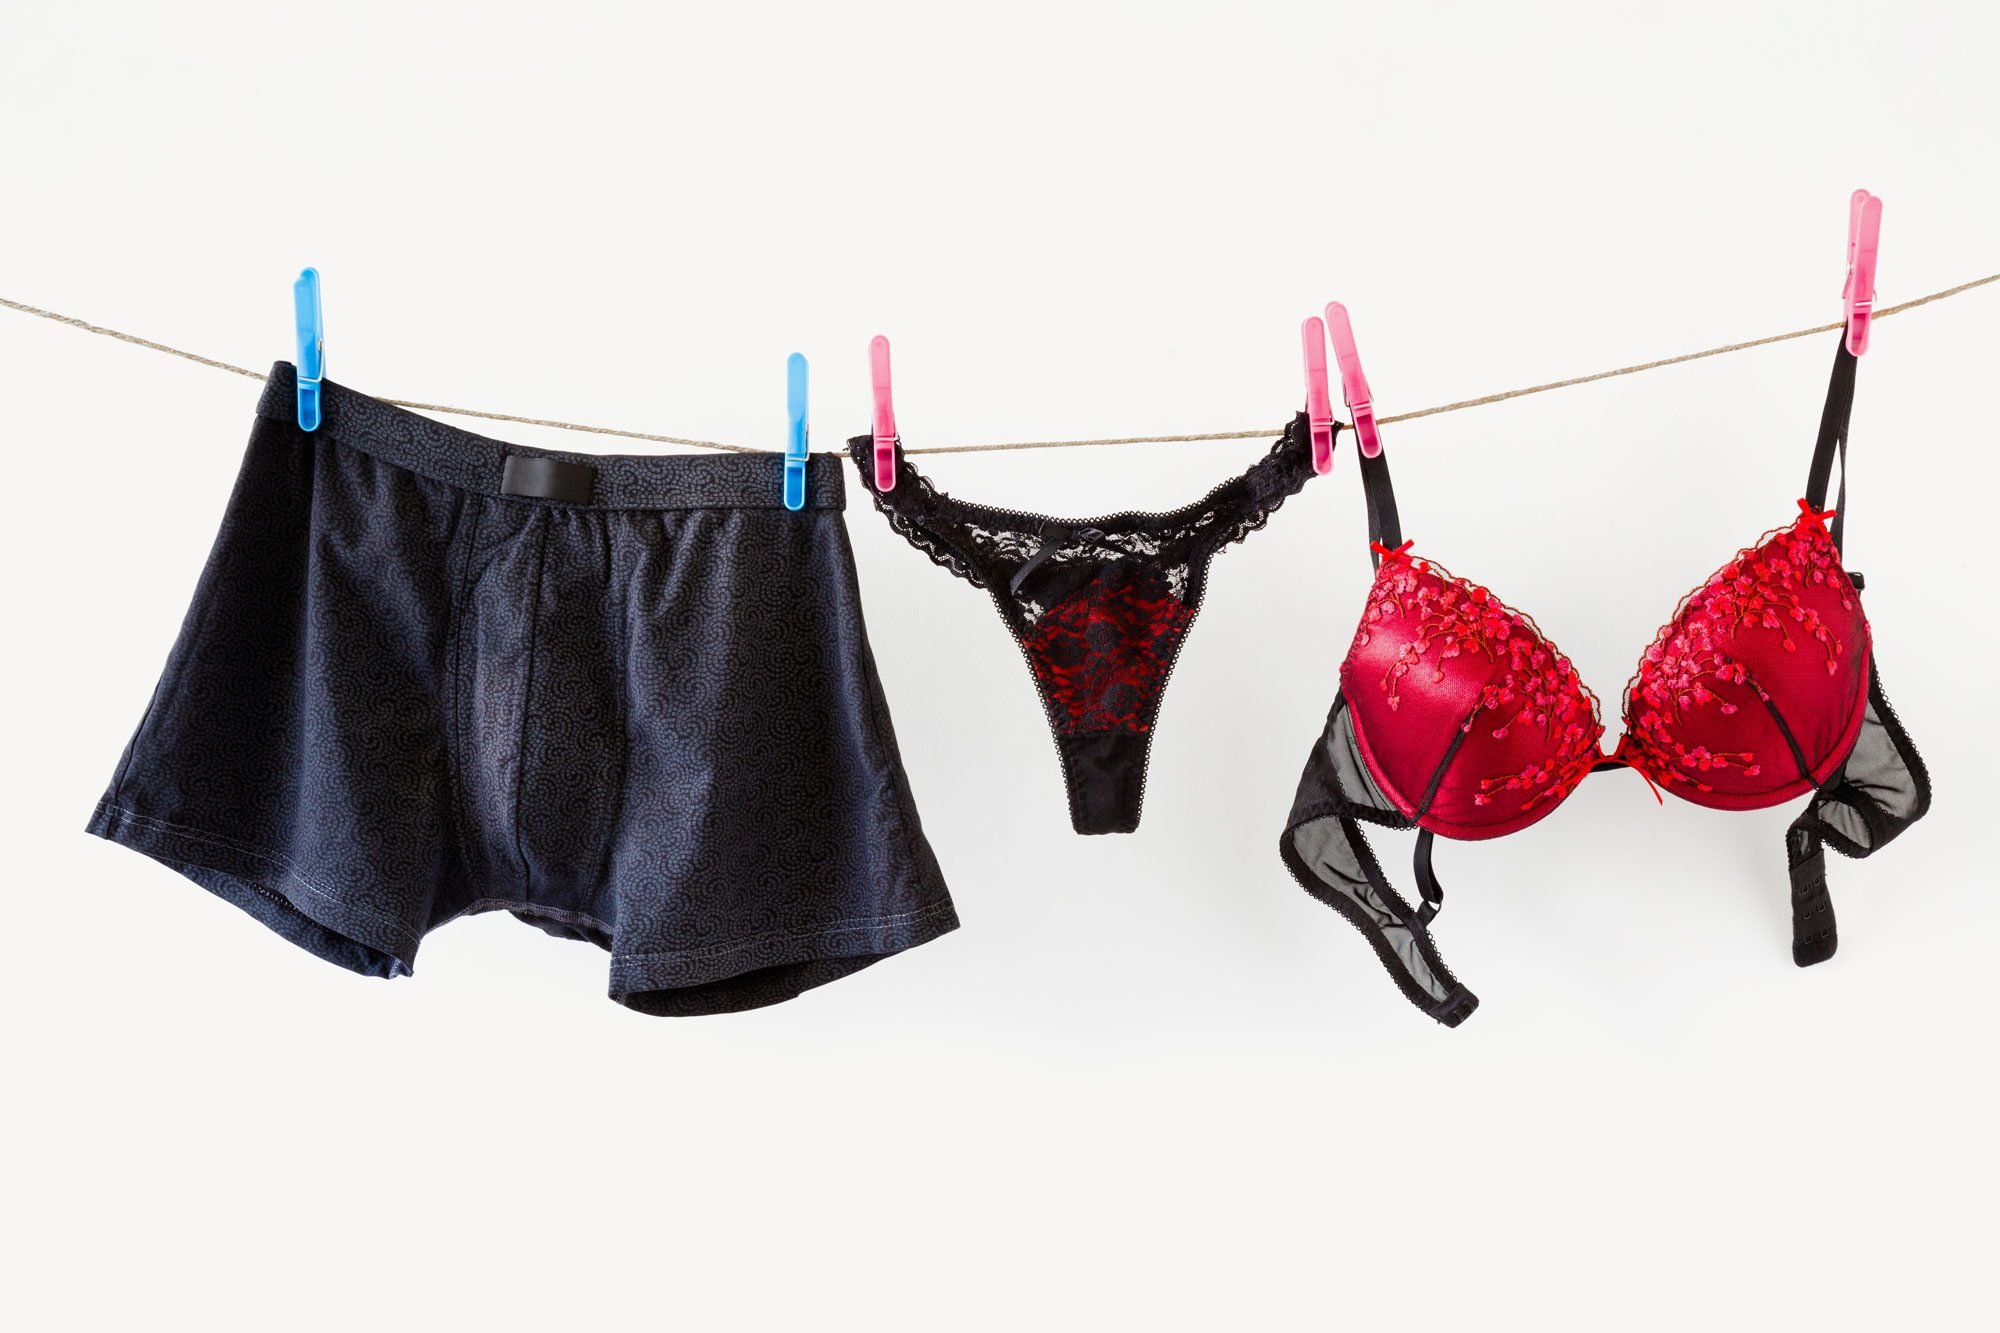 How long should you keep a pair of underwear before you throw it